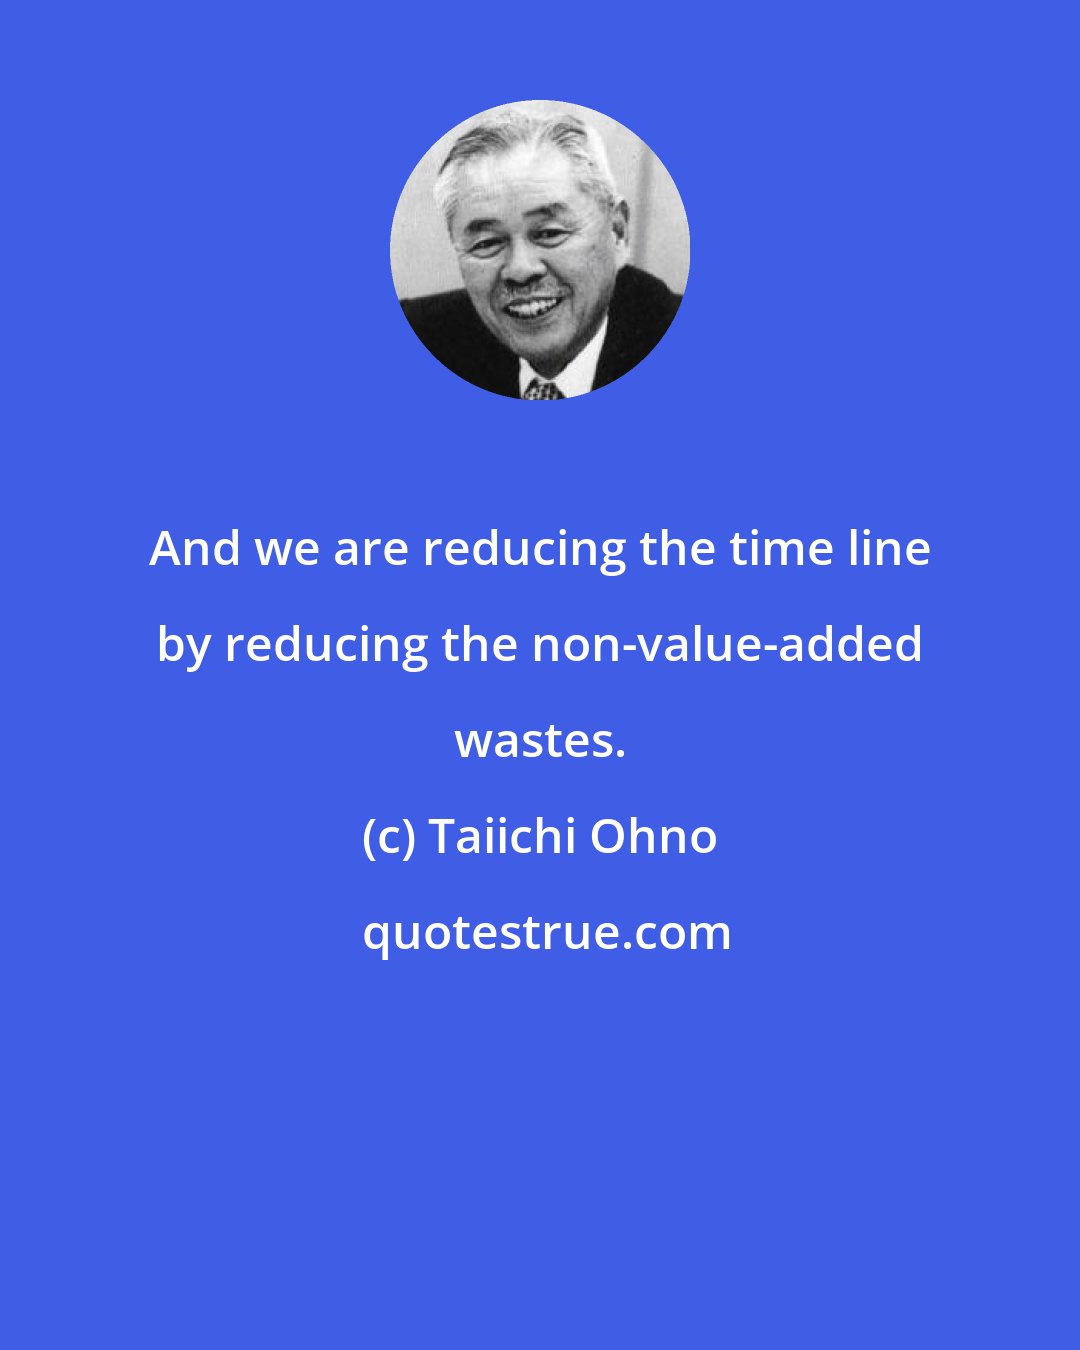 Taiichi Ohno: And we are reducing the time line by reducing the non-value-added wastes.